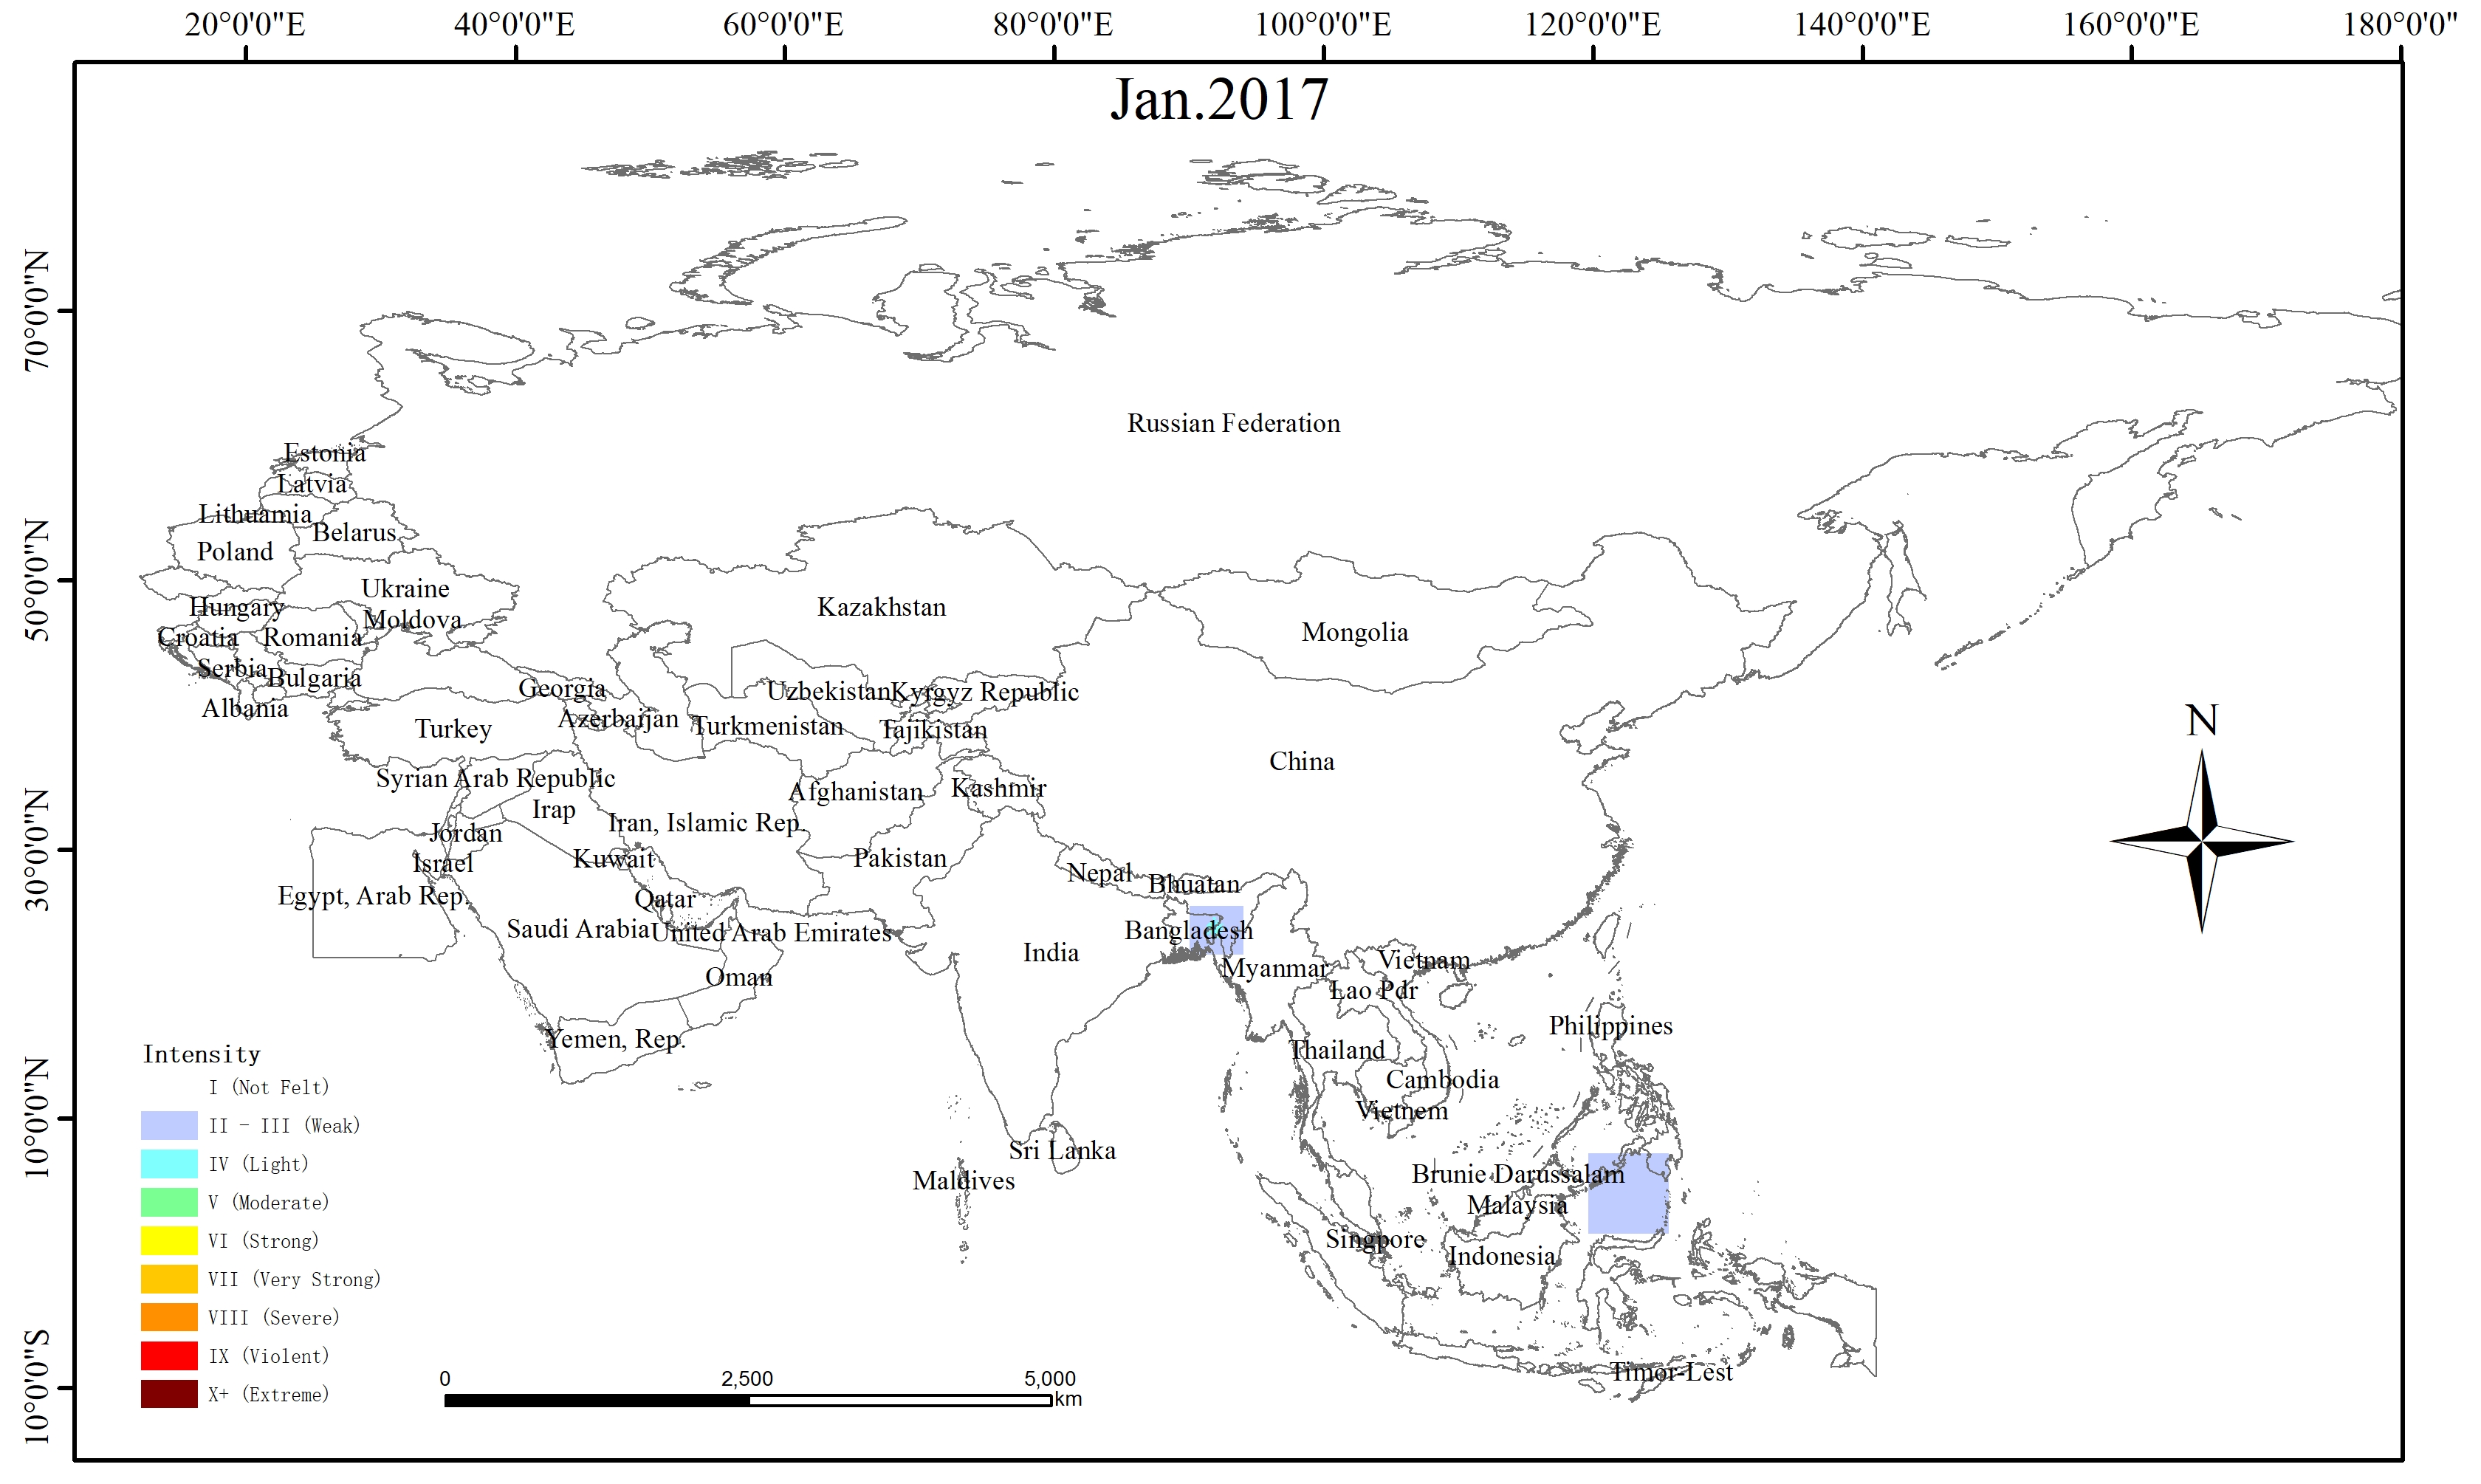 Spatio-temporal Distribution of Earthquake Disaster in the Belt and Road Area in 2017